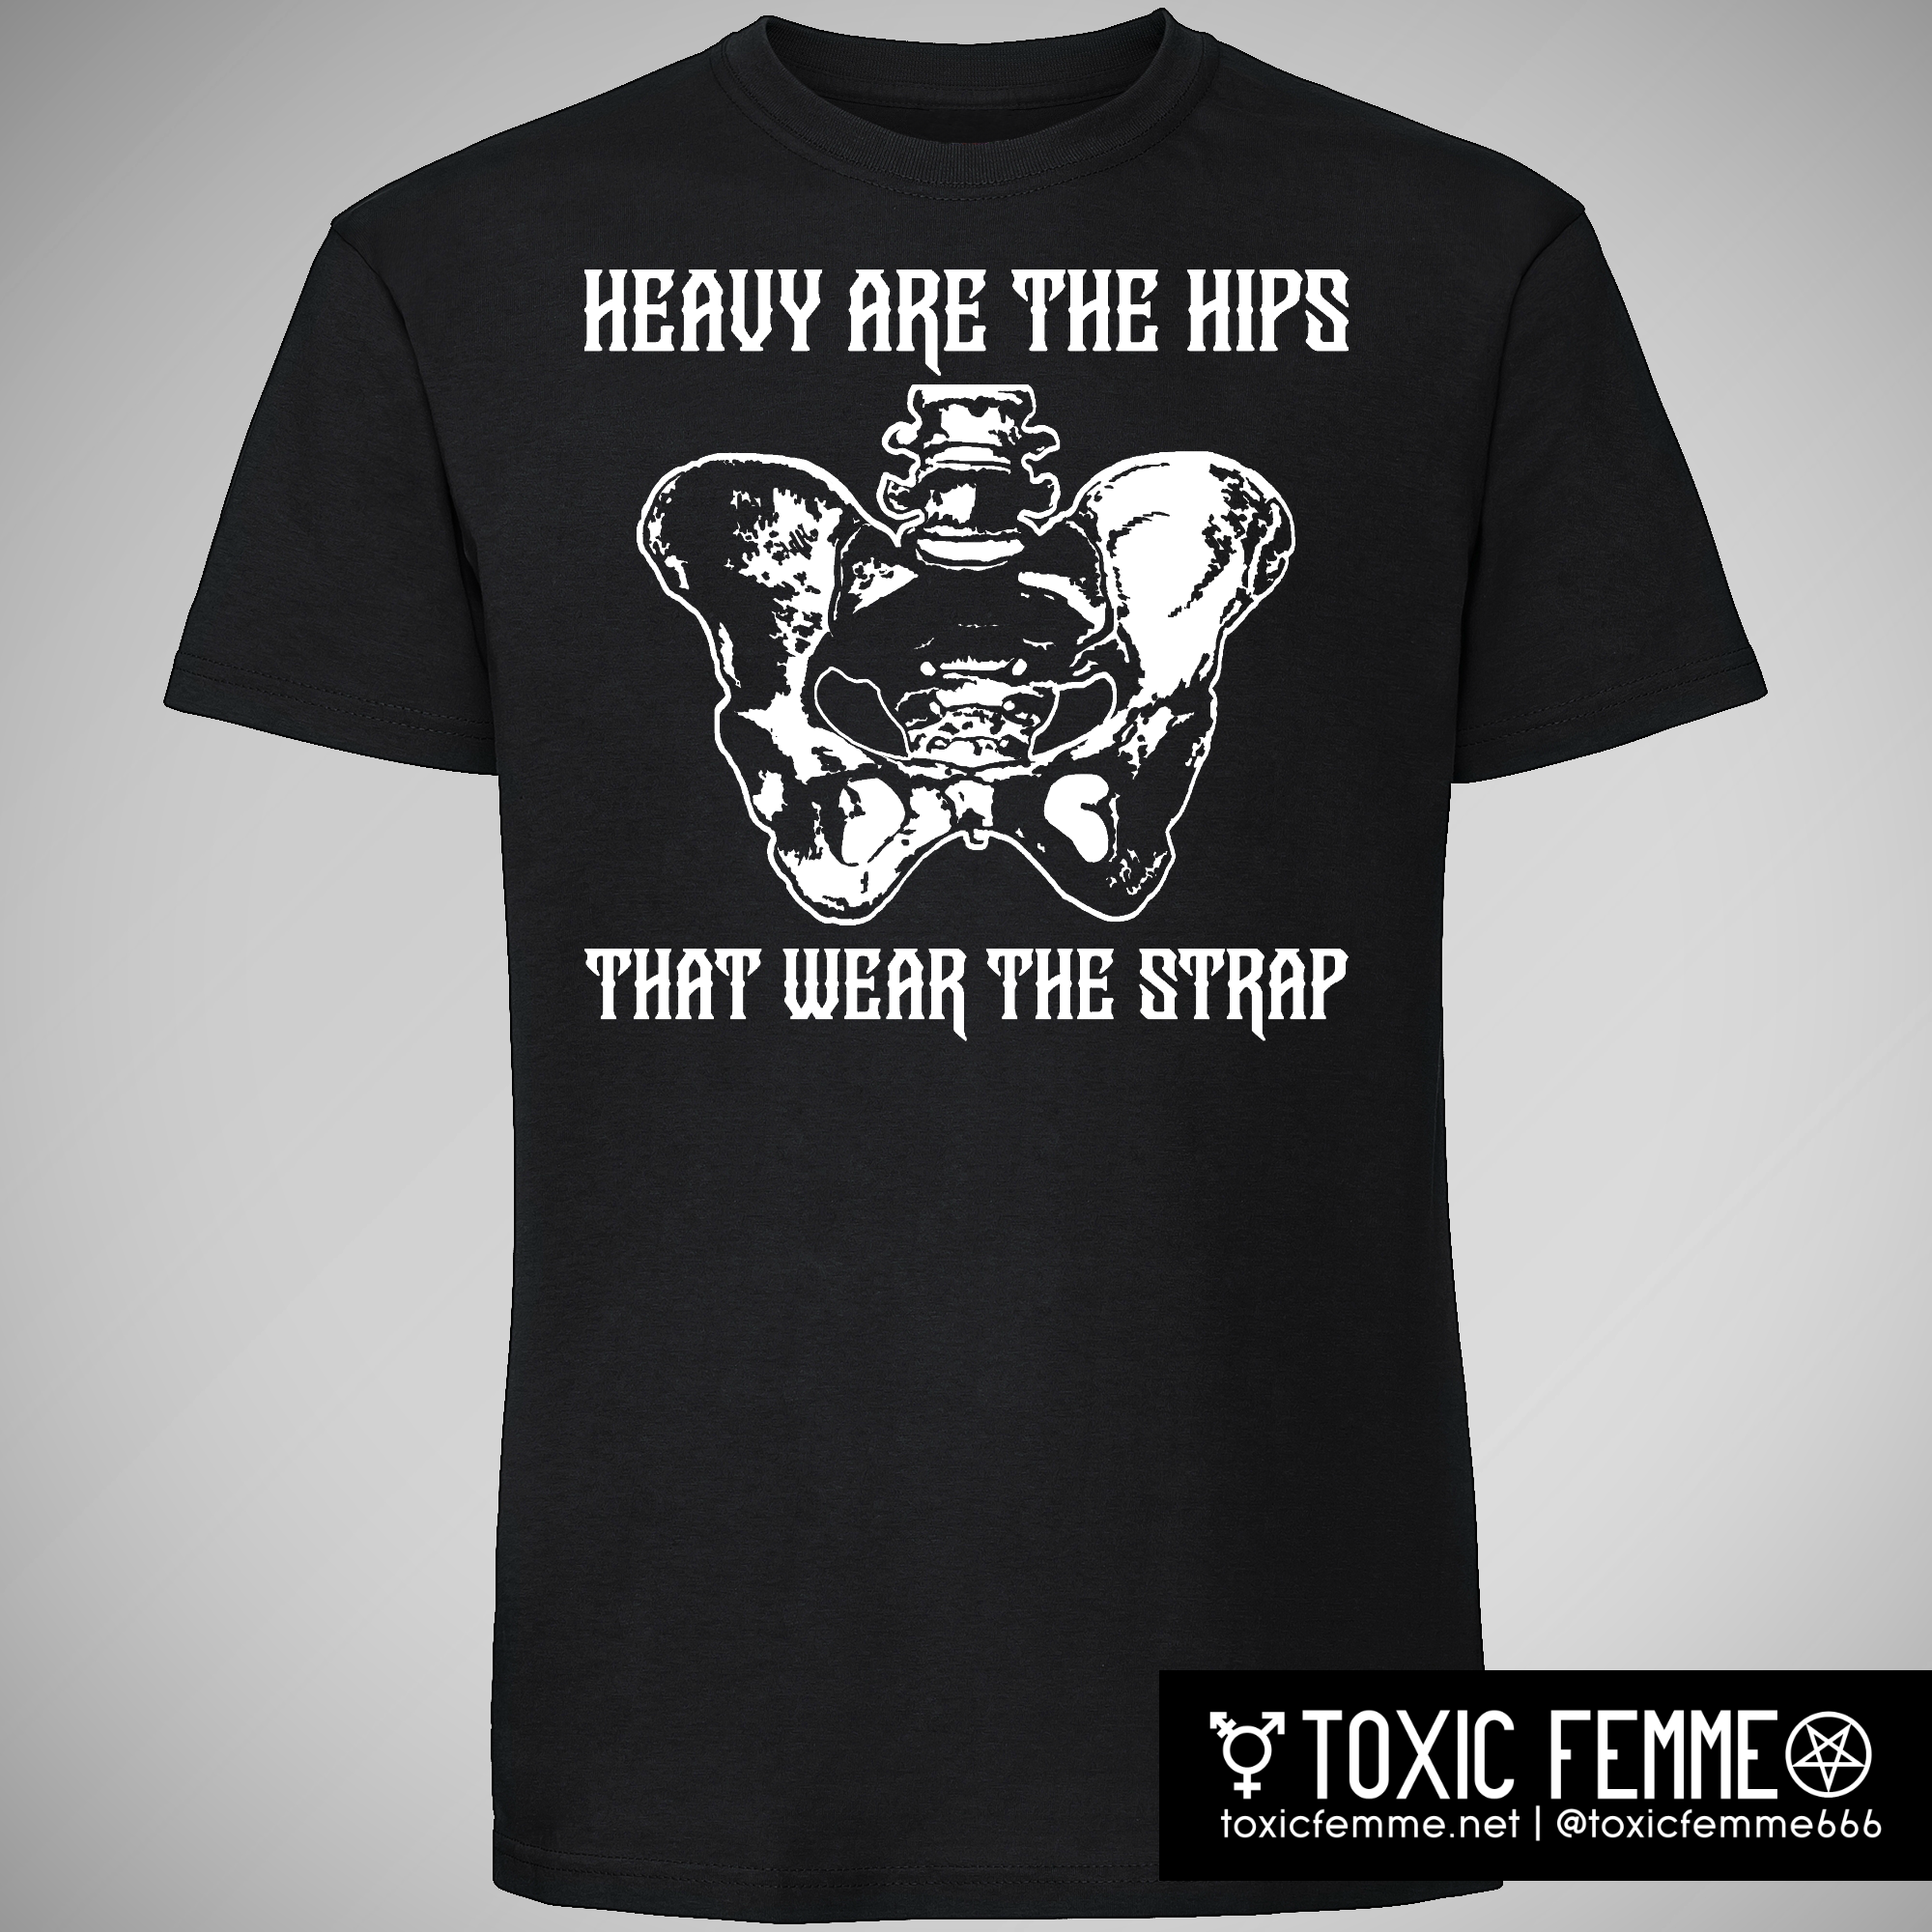 Heavy Are The Hips That Wear The Strap tee shirt – Toxic Femme